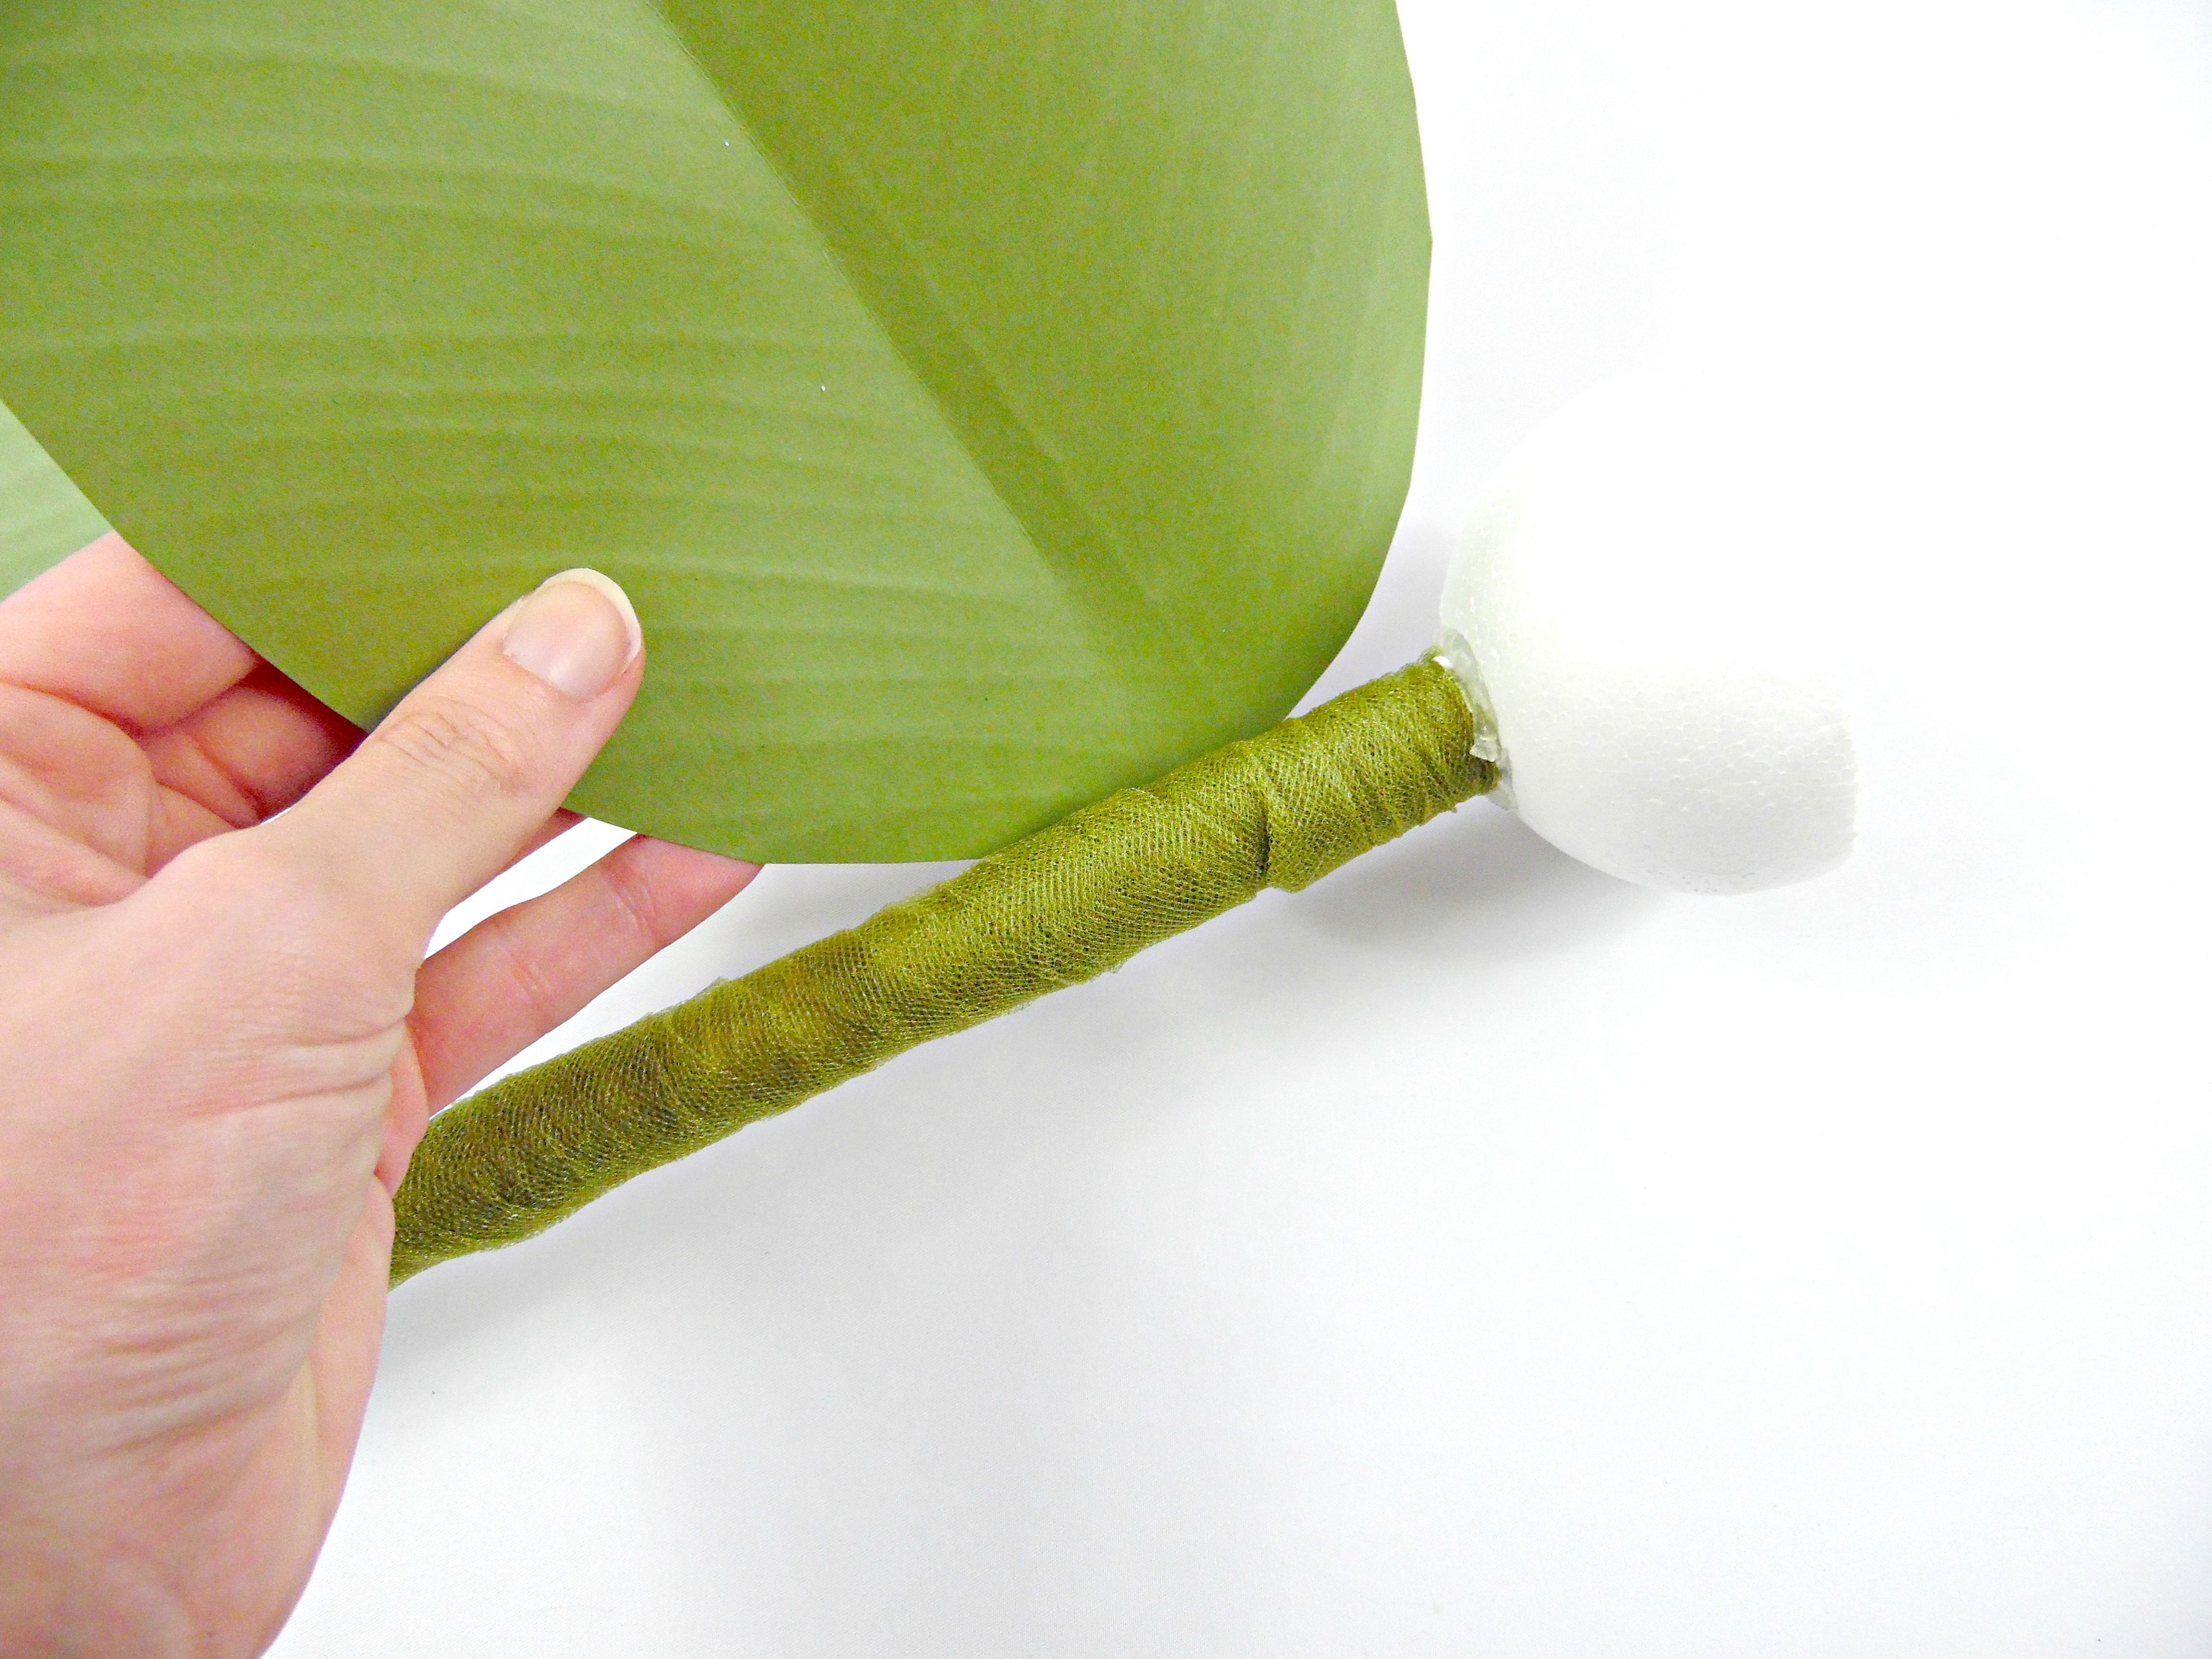 This giant paper flower stem is ready to have the leaves attached. Here, we are attaching one giant paper flower leaf to a tulle-covered stem, just below the foam ball, which will be the head of the flower.